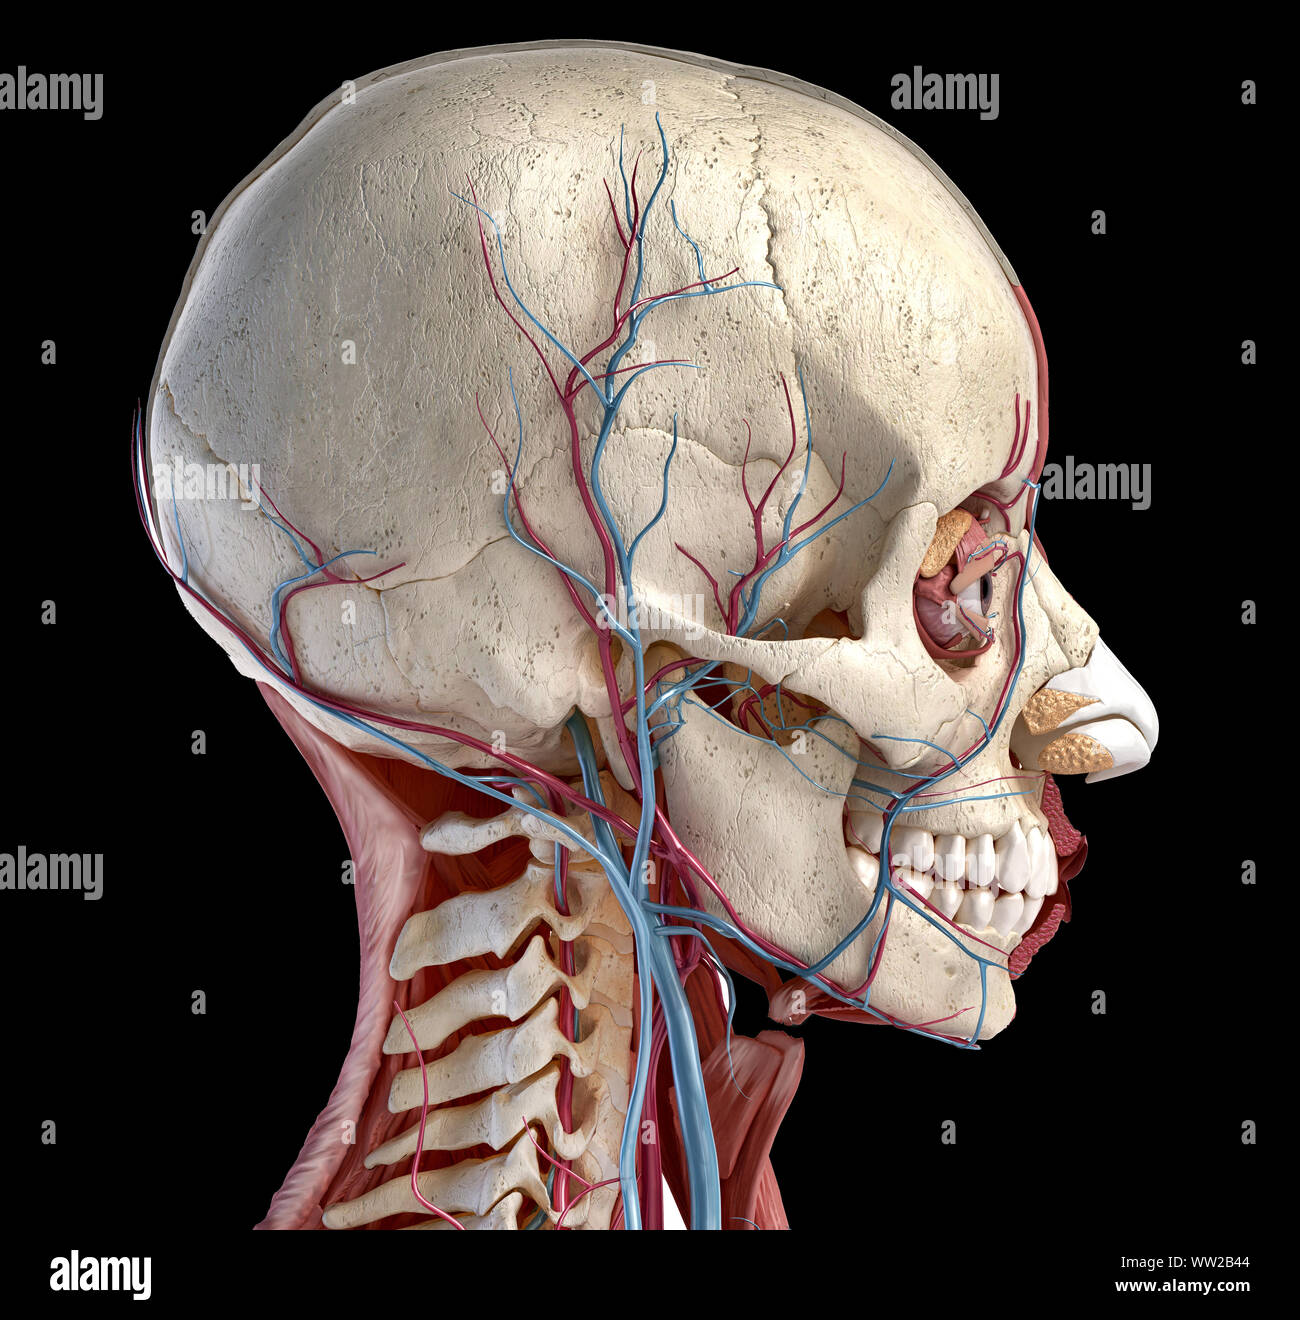 Human 3d anatomy illustration, showing skull, muscles, eyes and blood vessels. Side view. On black background. Stock Photo